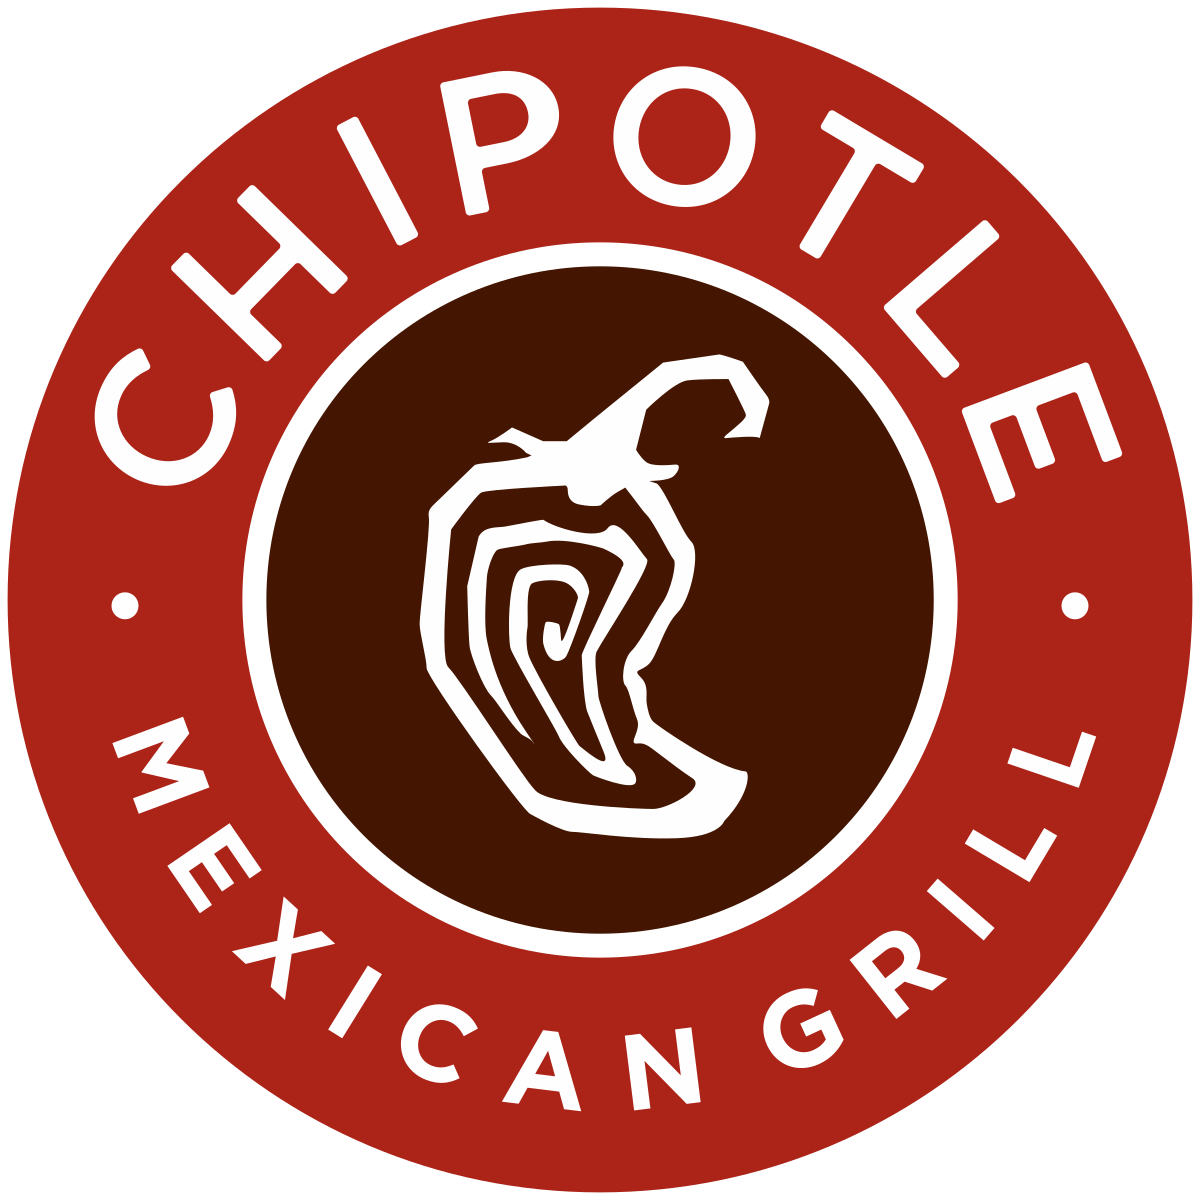 Chipotle Mexican Grill Store Locations in the USA